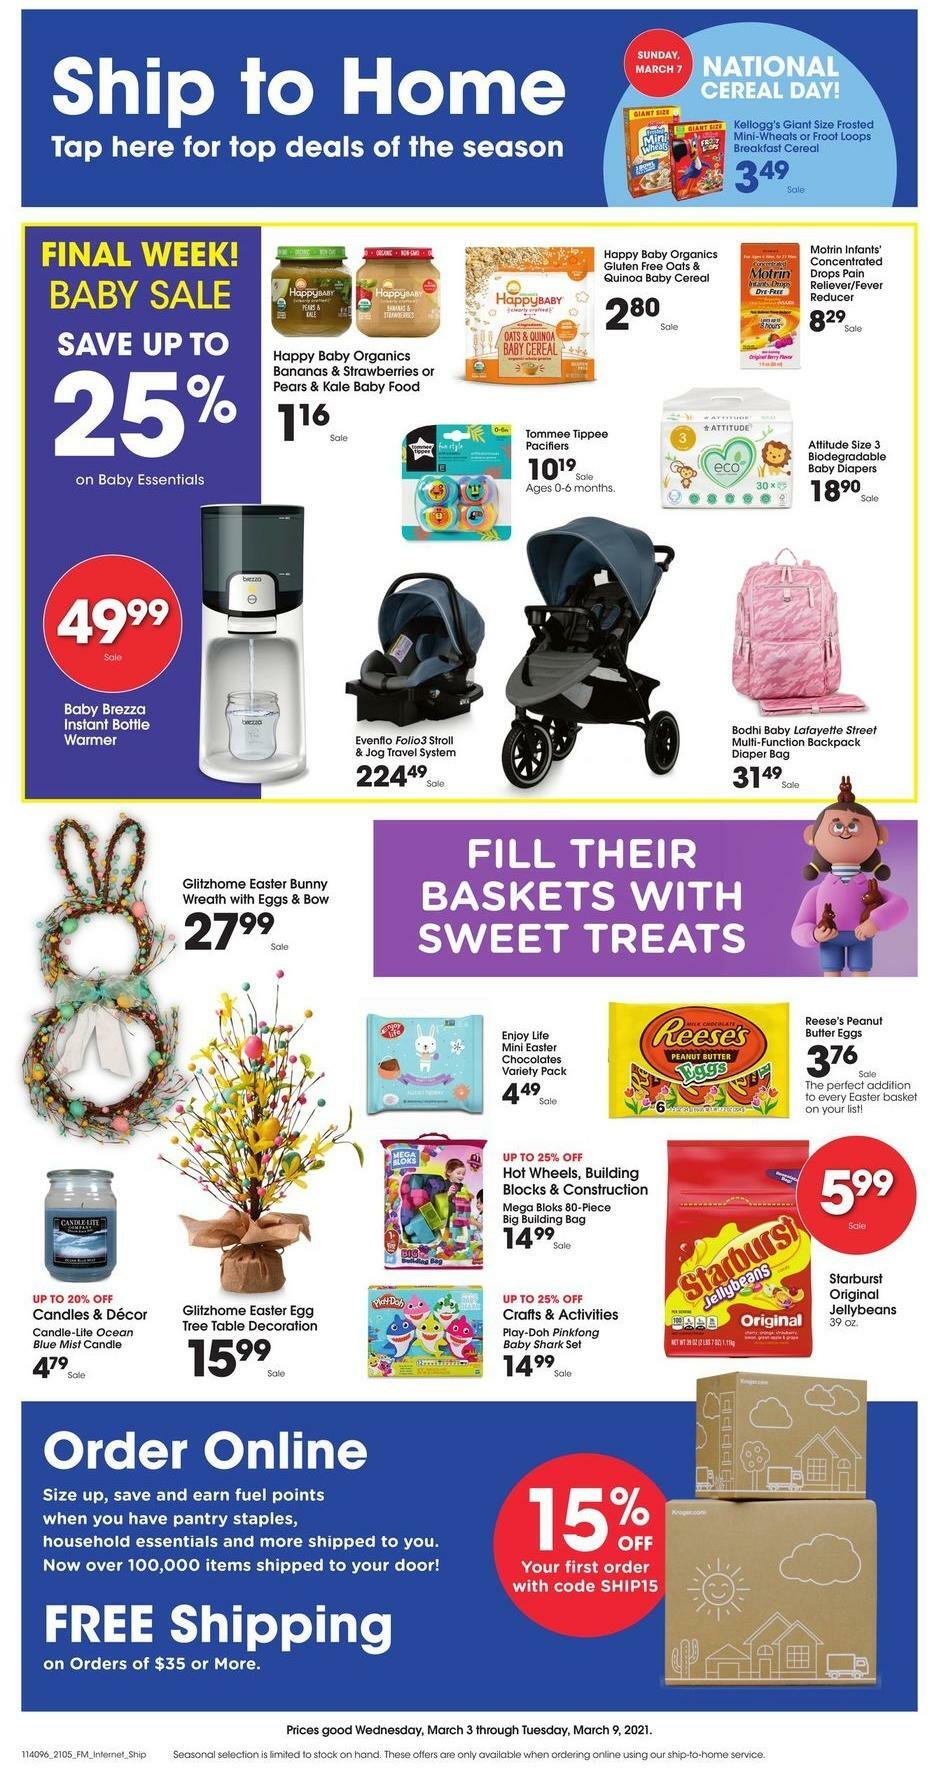 Fred Meyer Ship to Home Weekly Ad from March 3